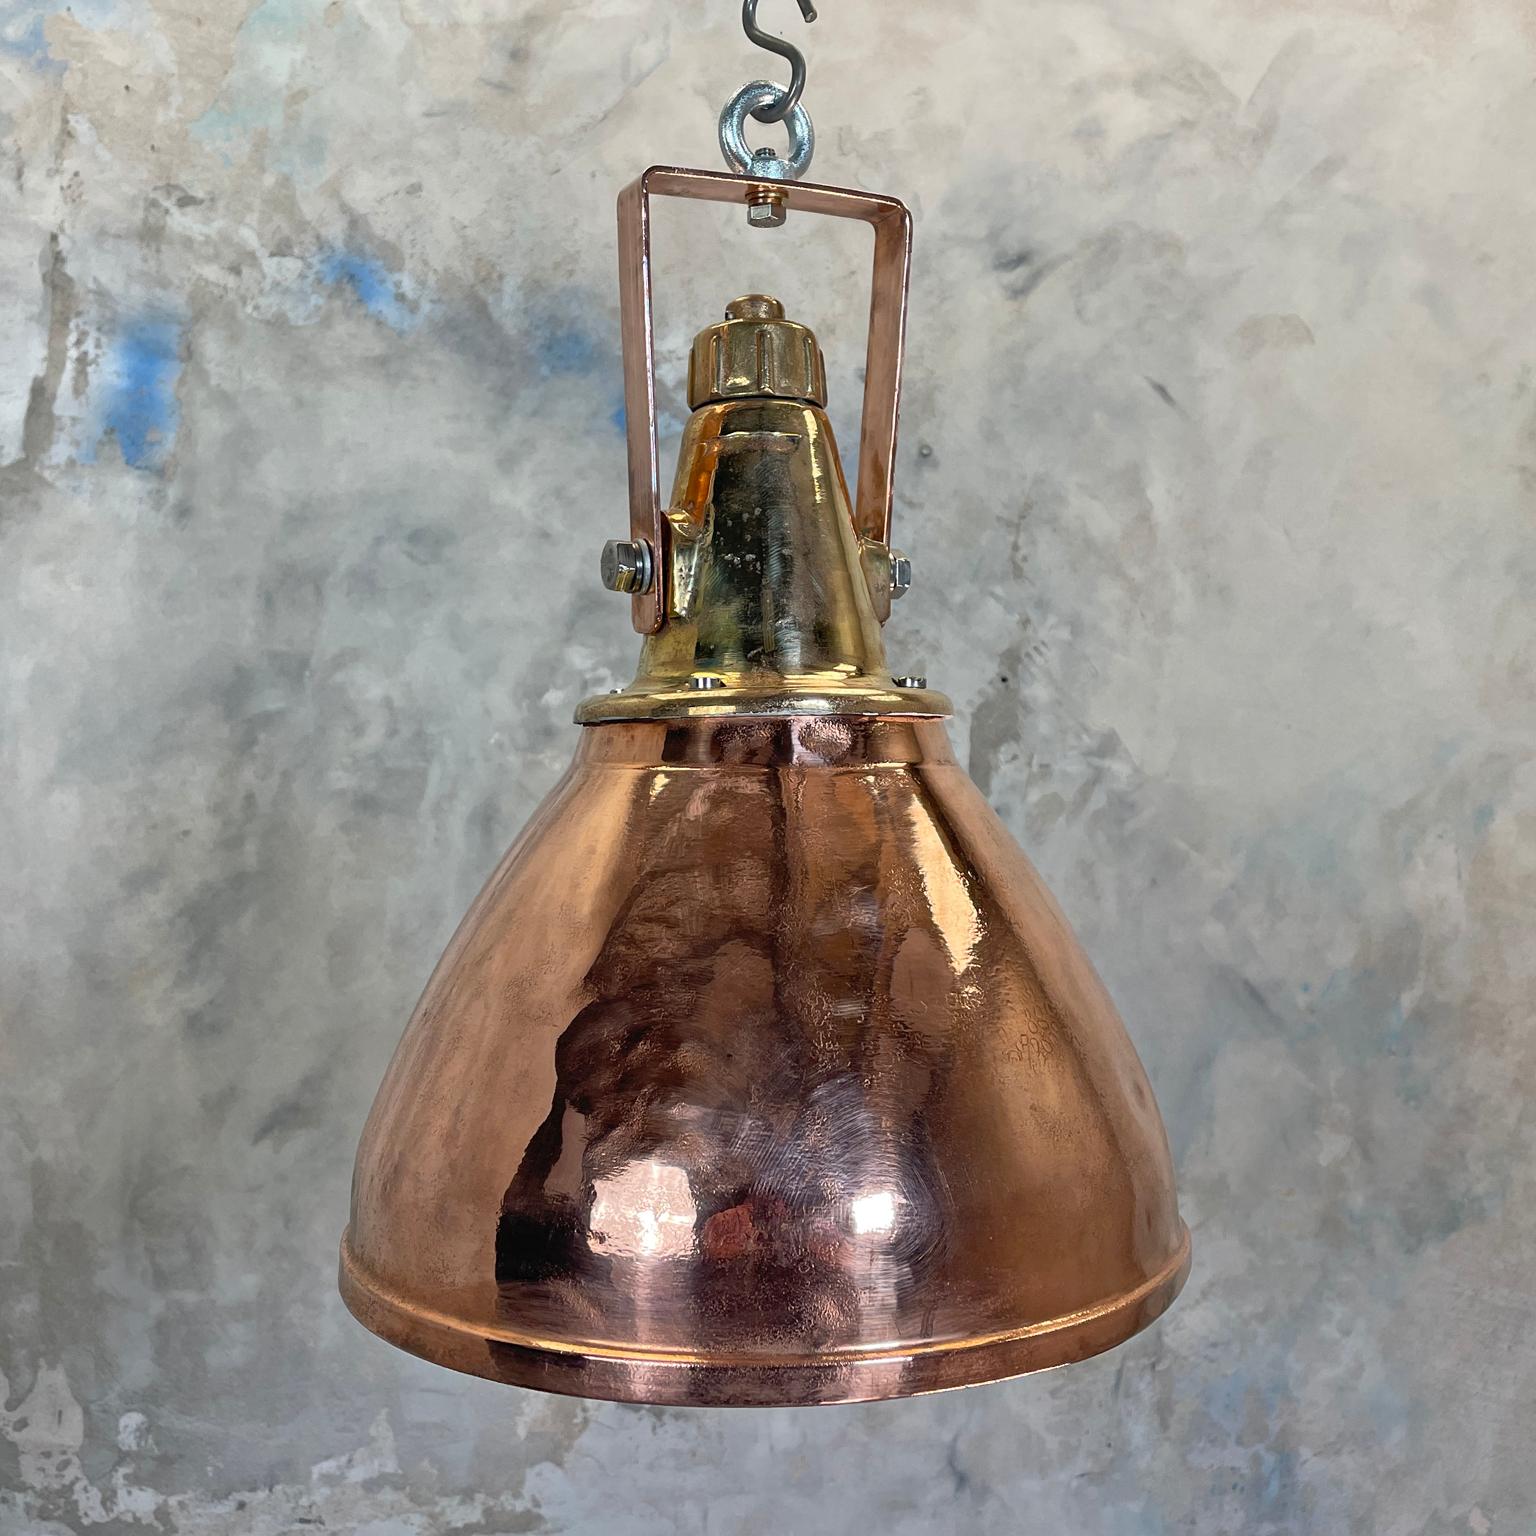 Cast 1970s German Copper & Brass Industrial Ceiling Pendant Light with Beam Focus